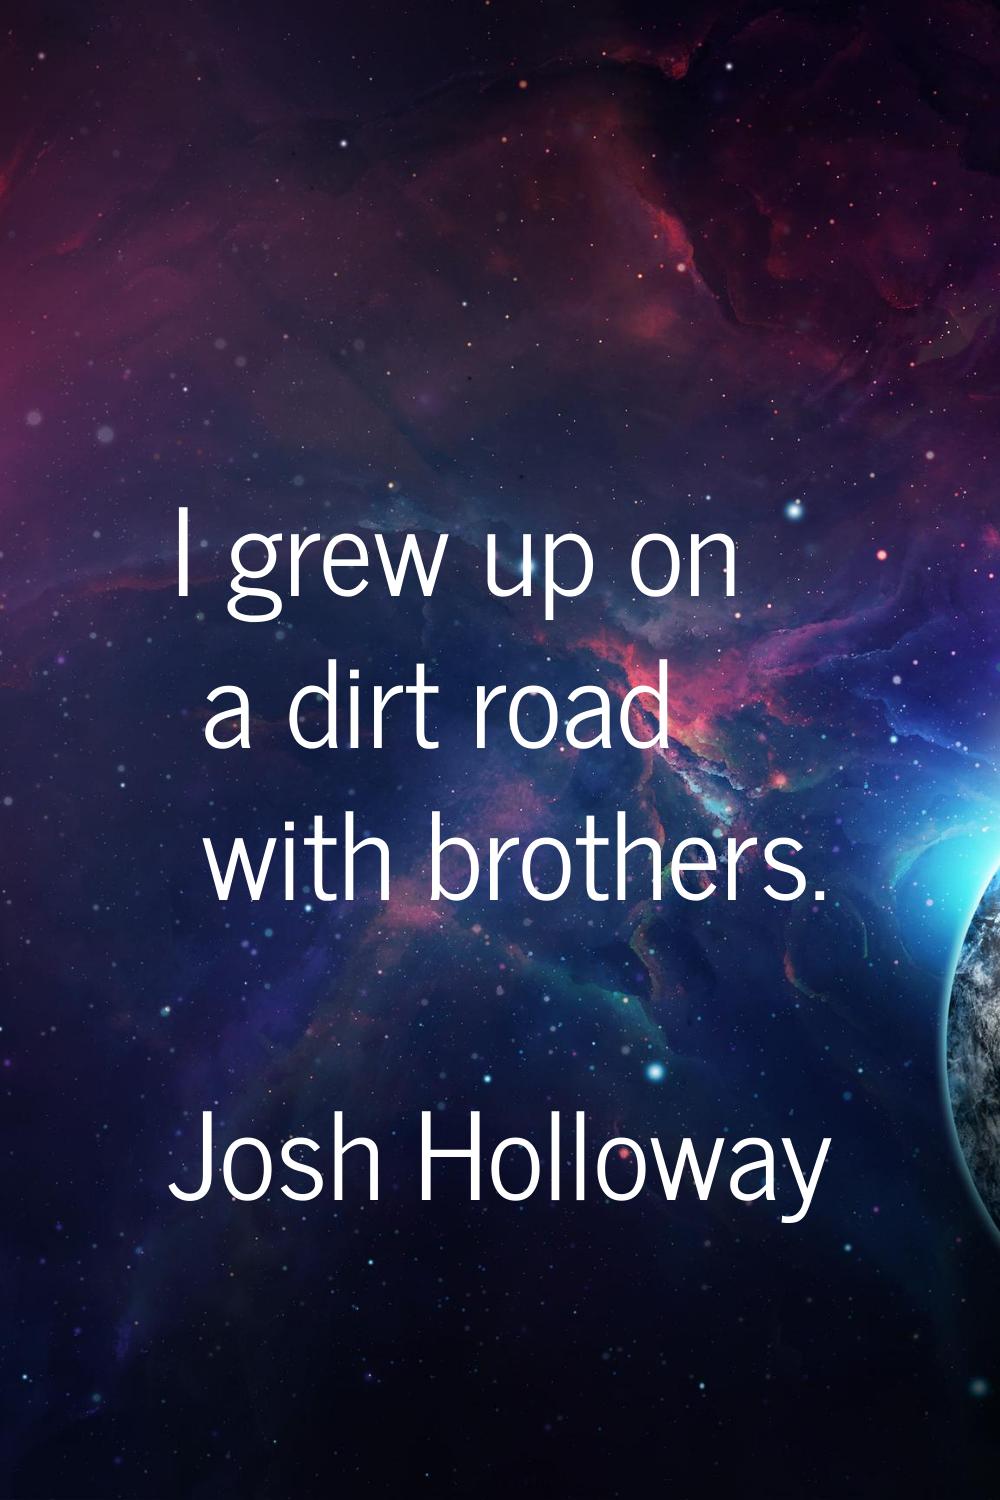 I grew up on a dirt road with brothers.